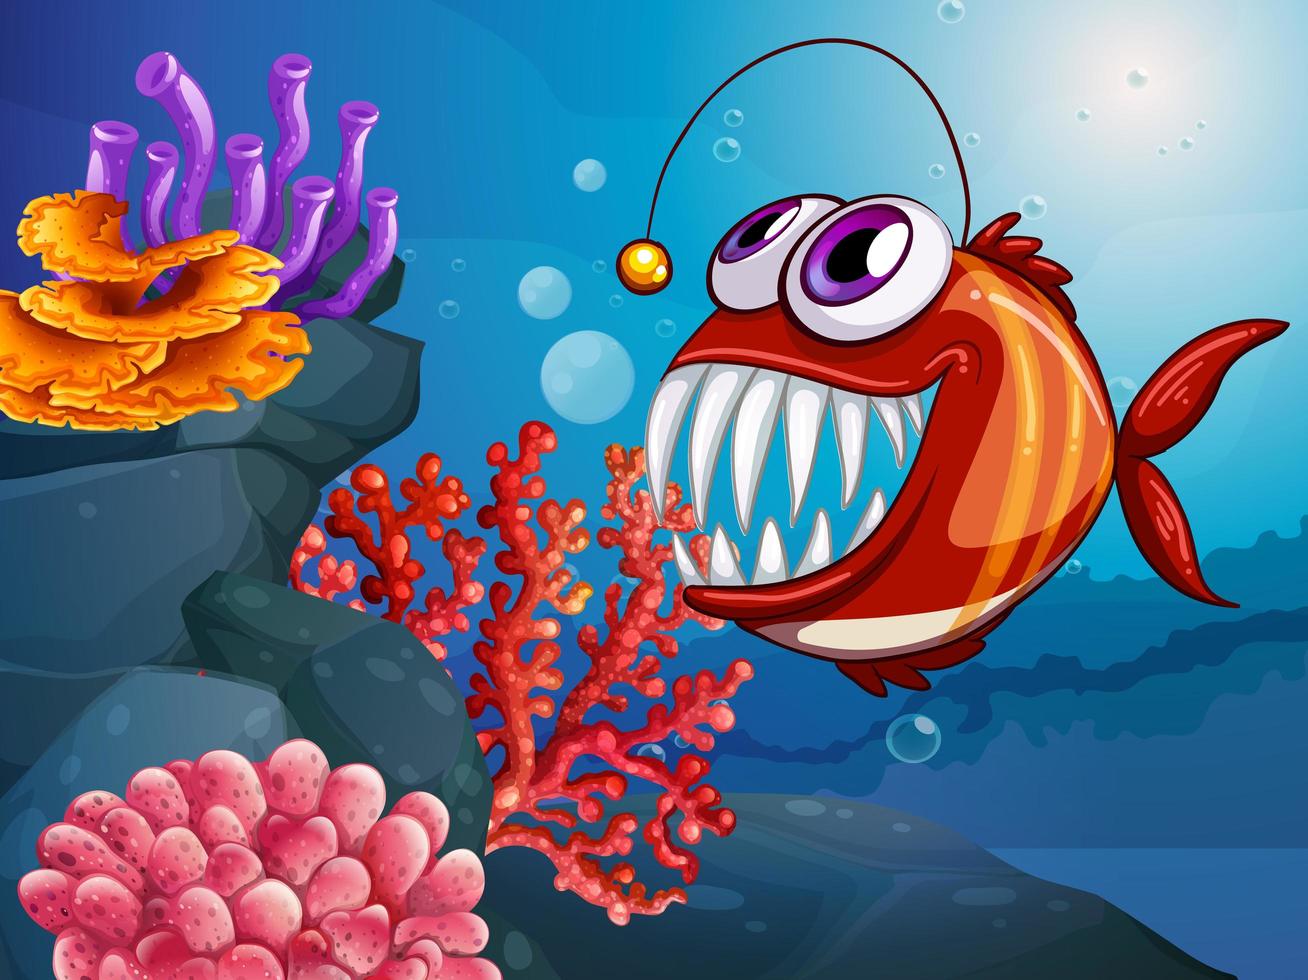 Angler fish in the underwater scene with corals vector